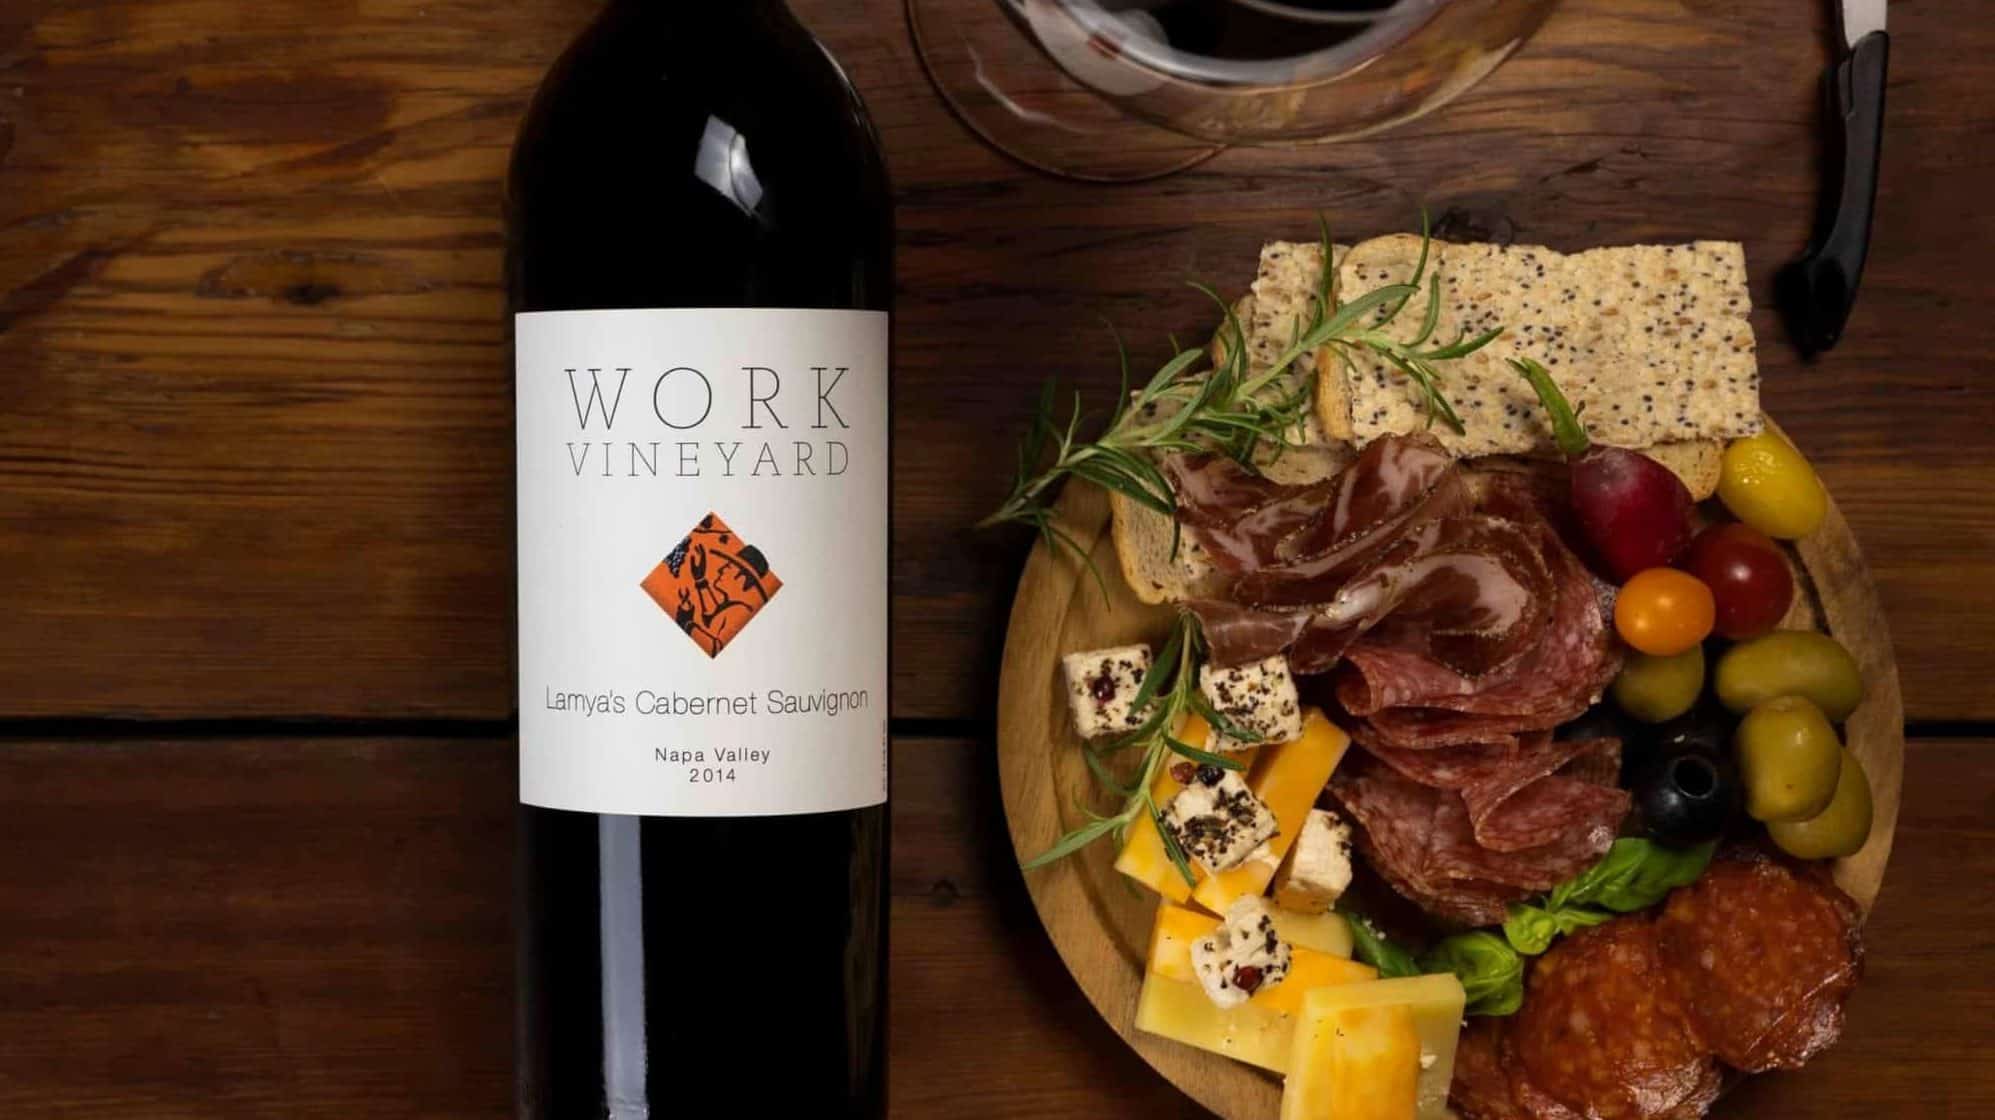 Work vineyard bottle by plate of cheese